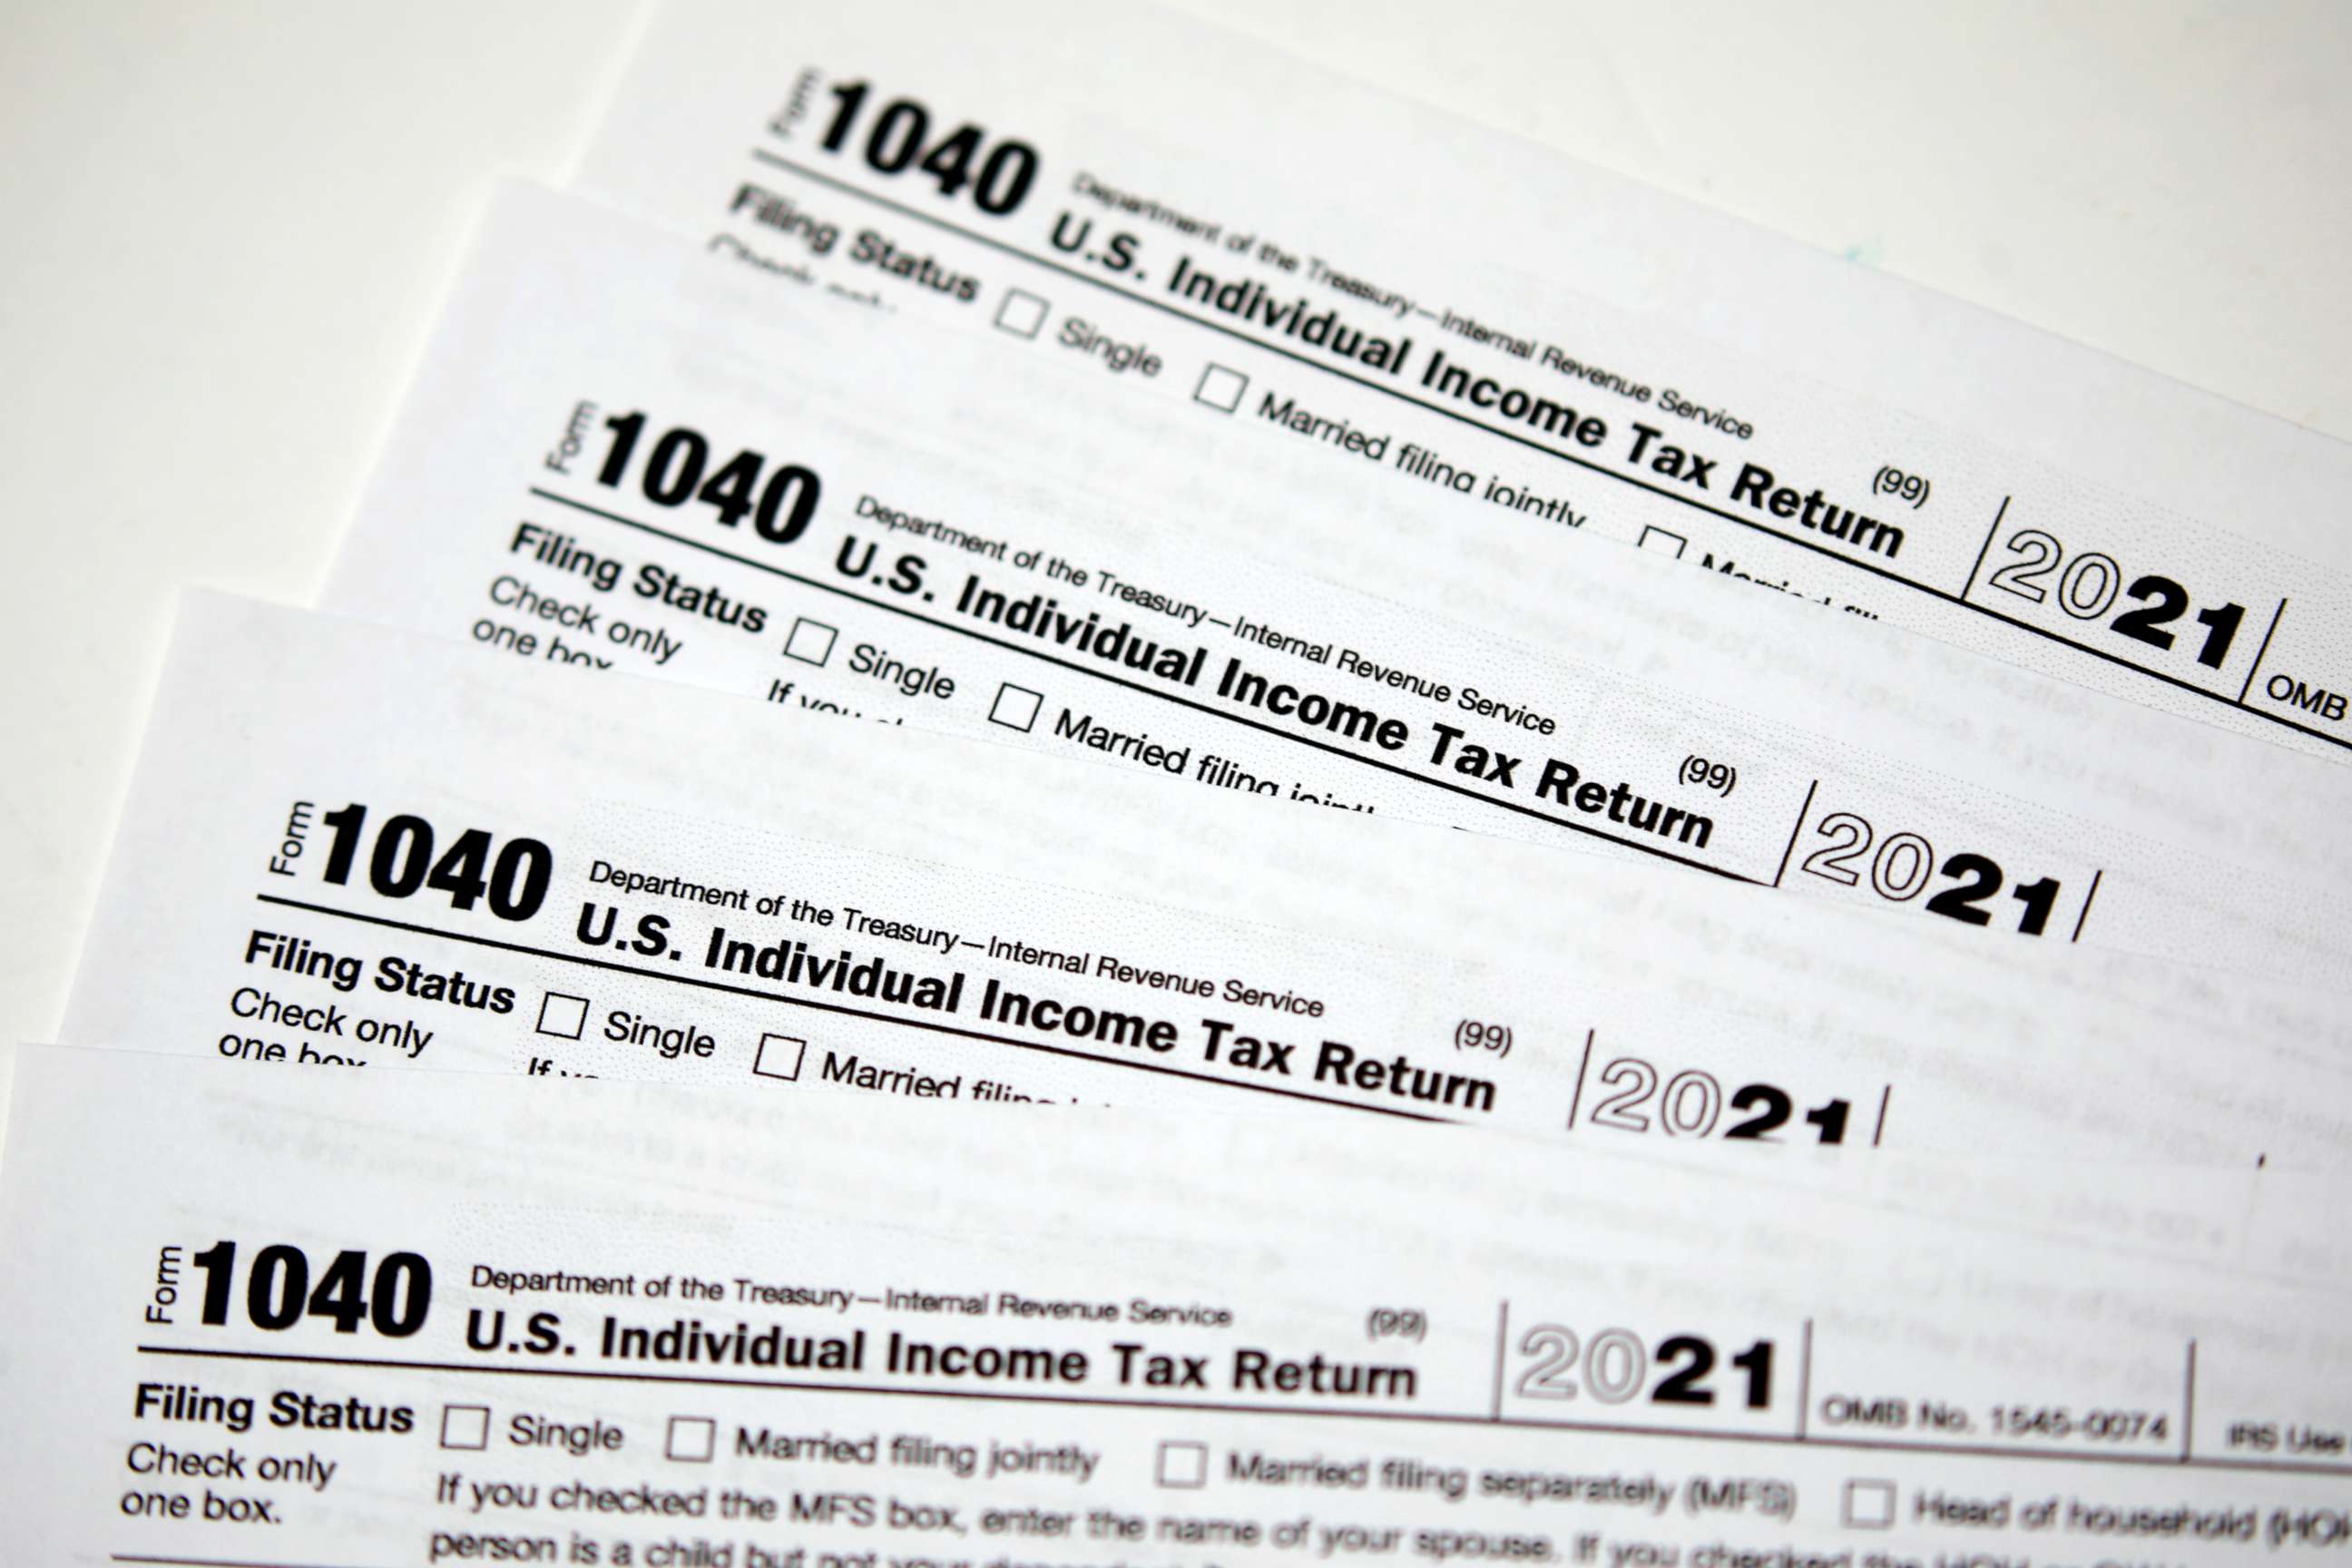 PHOTO: Internal Revenue Service 1040 Individual income tax forms for 2021 arranged in Louisville, Kentucky, April 12, 2022.